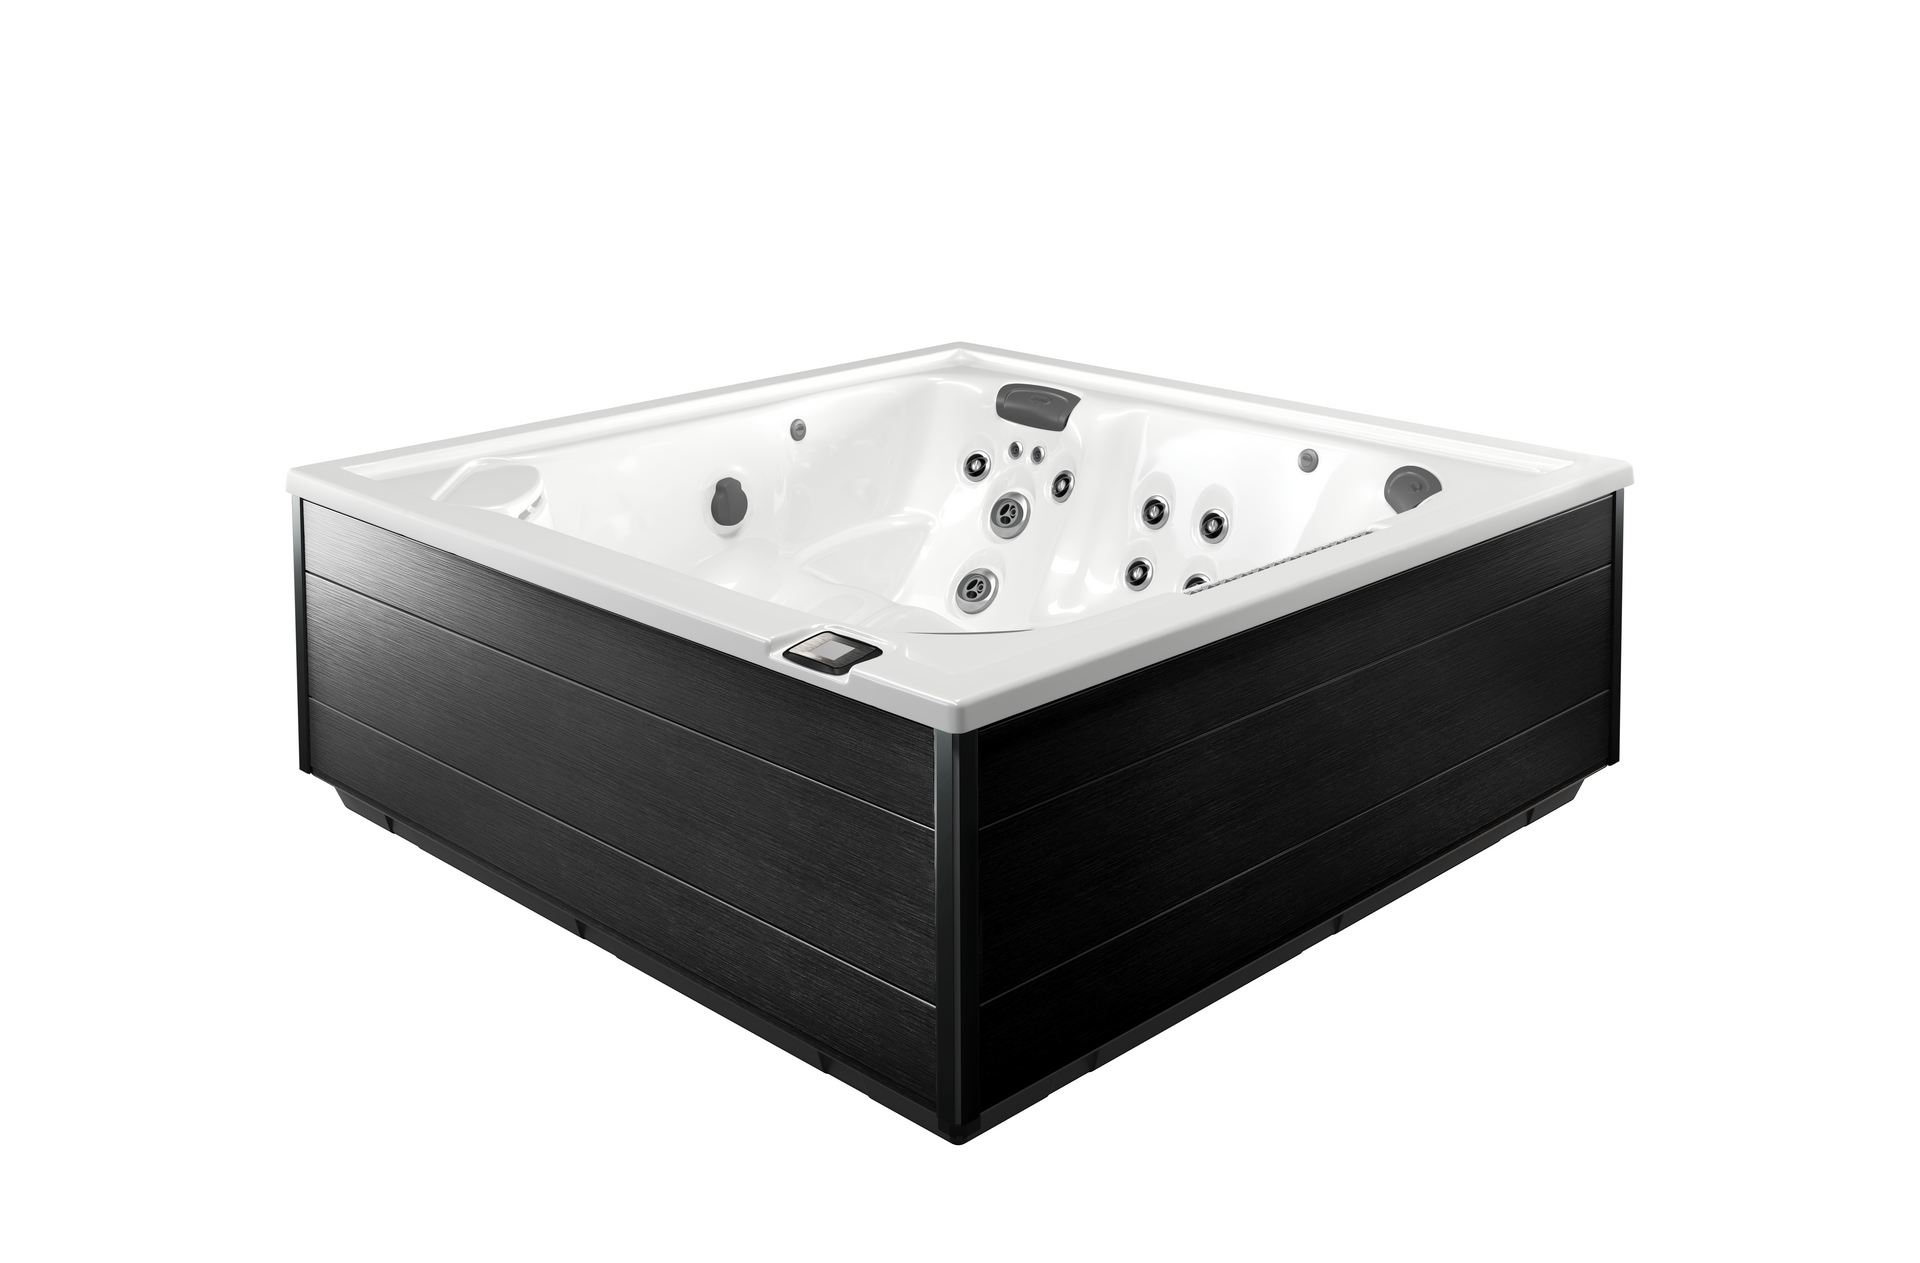 The Jacuzzi J-LXL Offers X-IR Therapy & Other Patented Technology